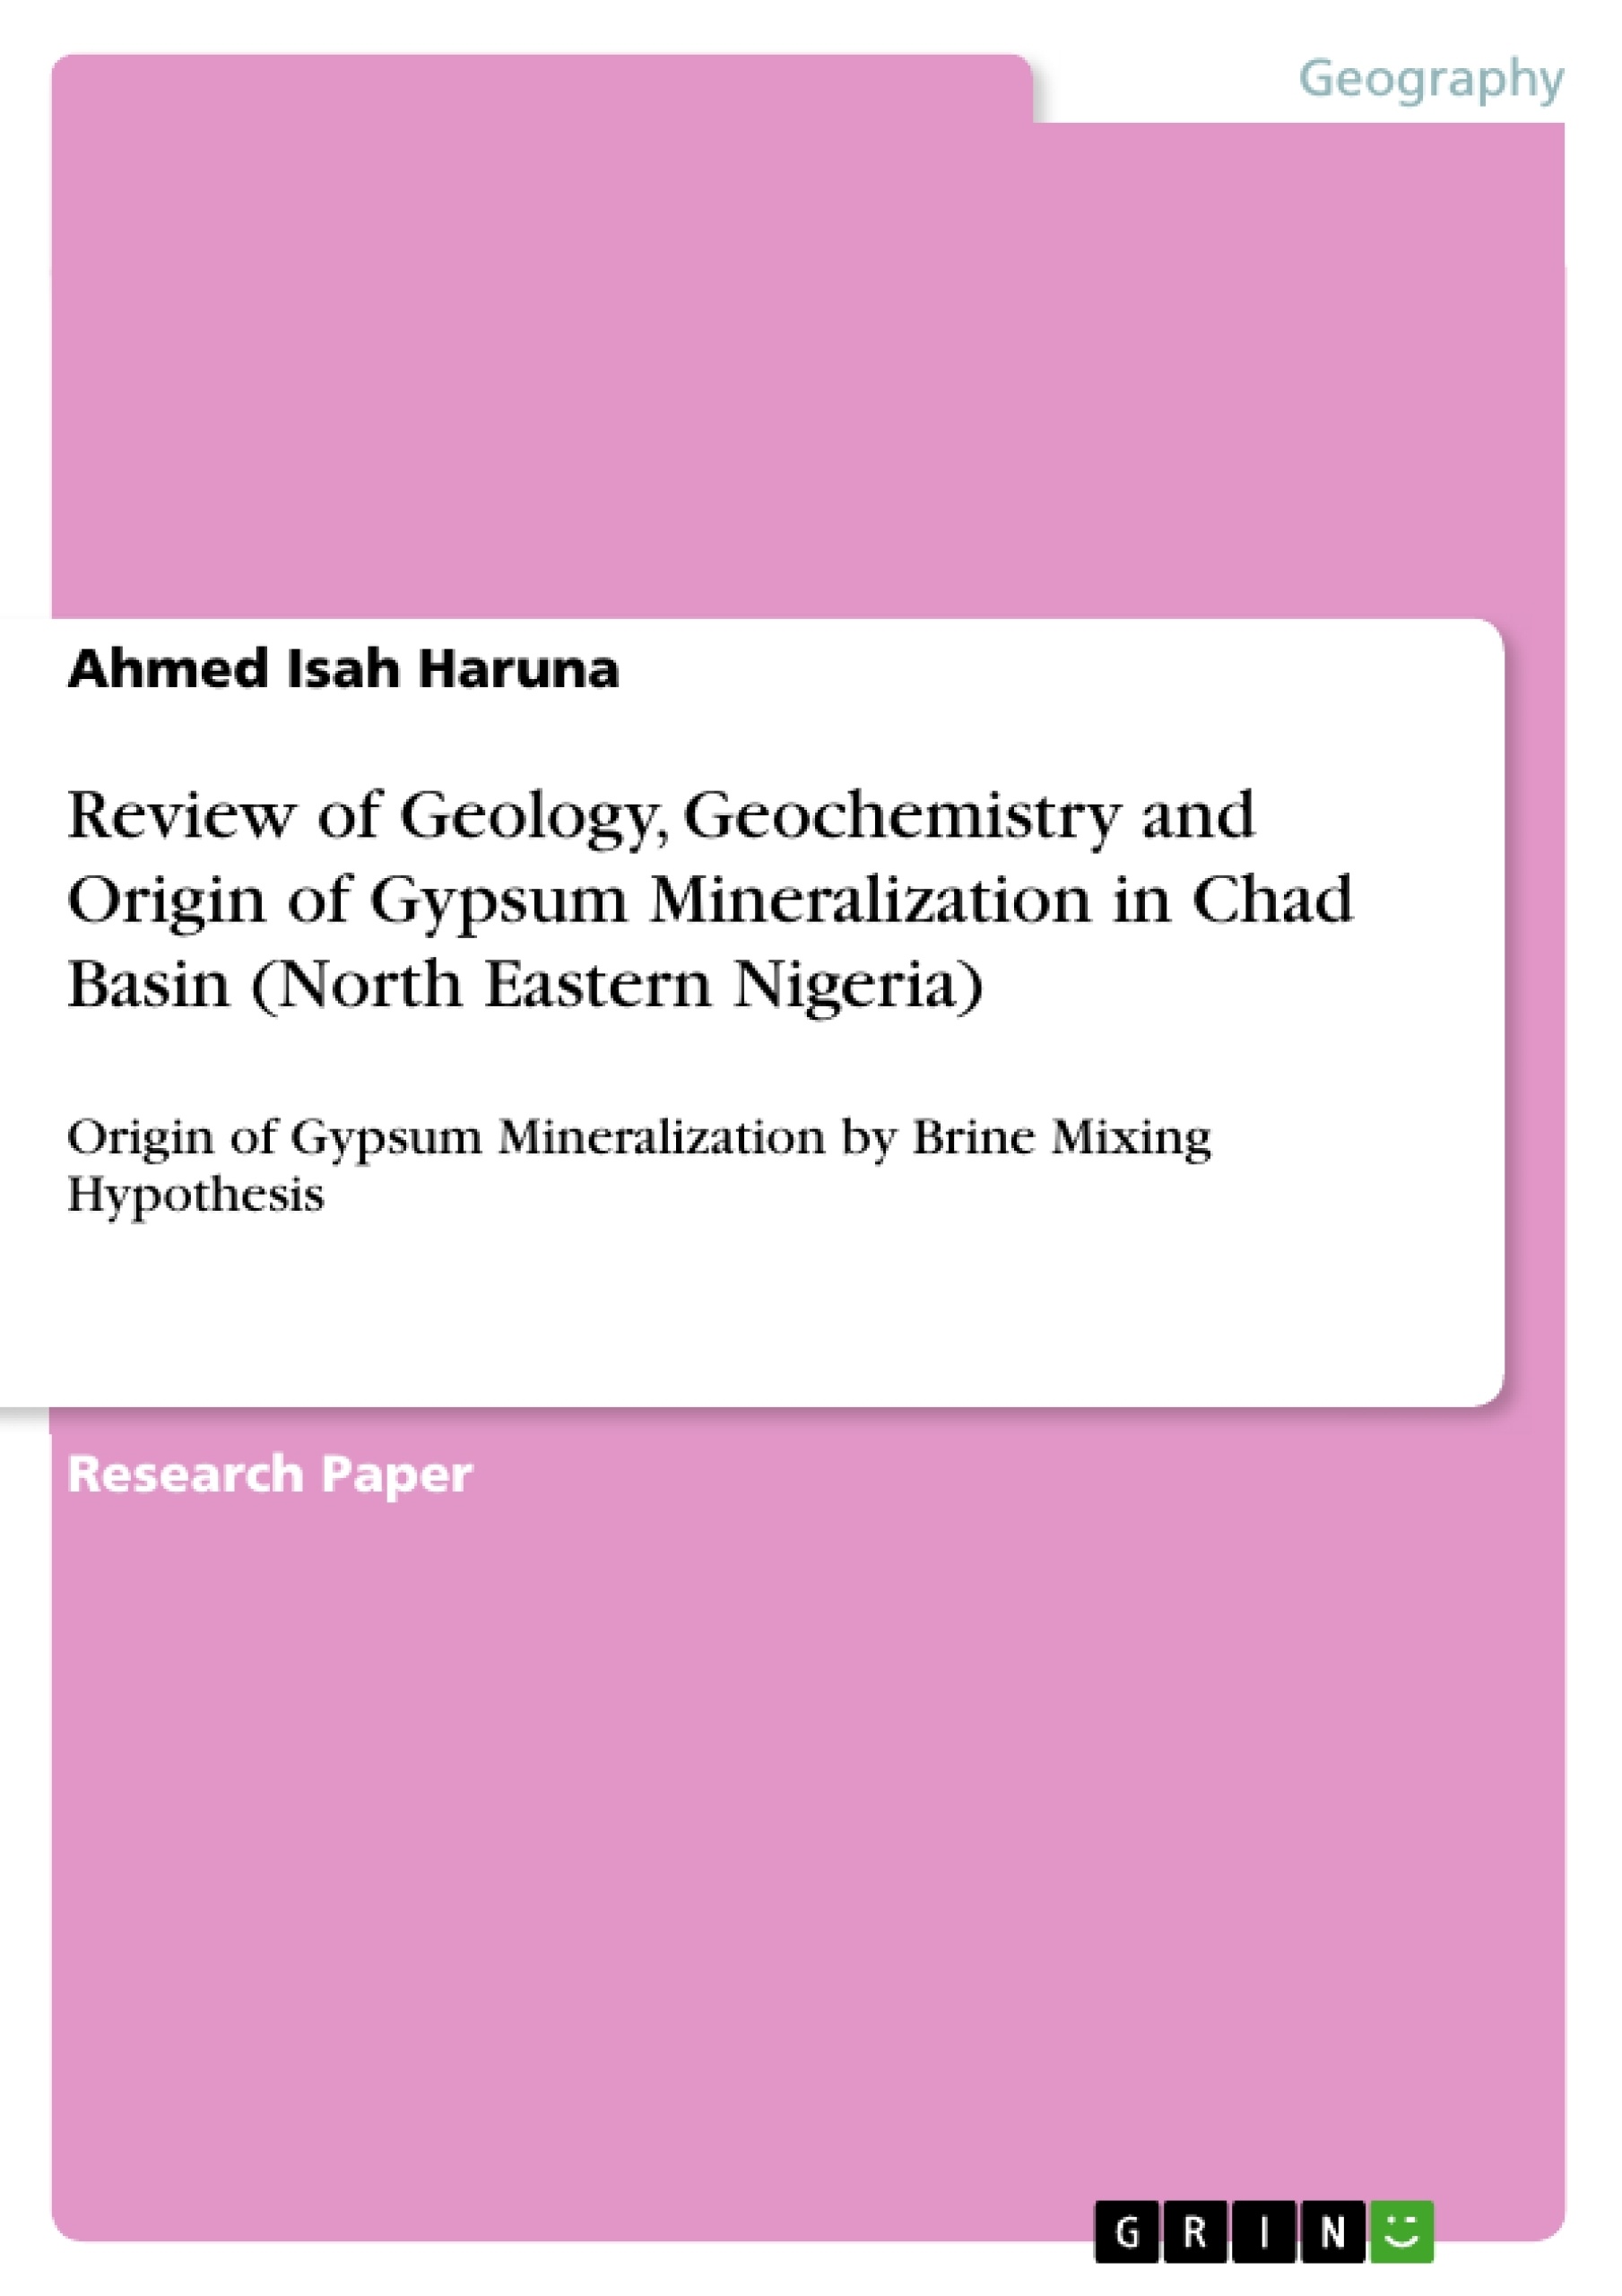 Título: Review of Geology, Geochemistry and Origin of Gypsum Mineralization in Chad Basin (North Eastern Nigeria)